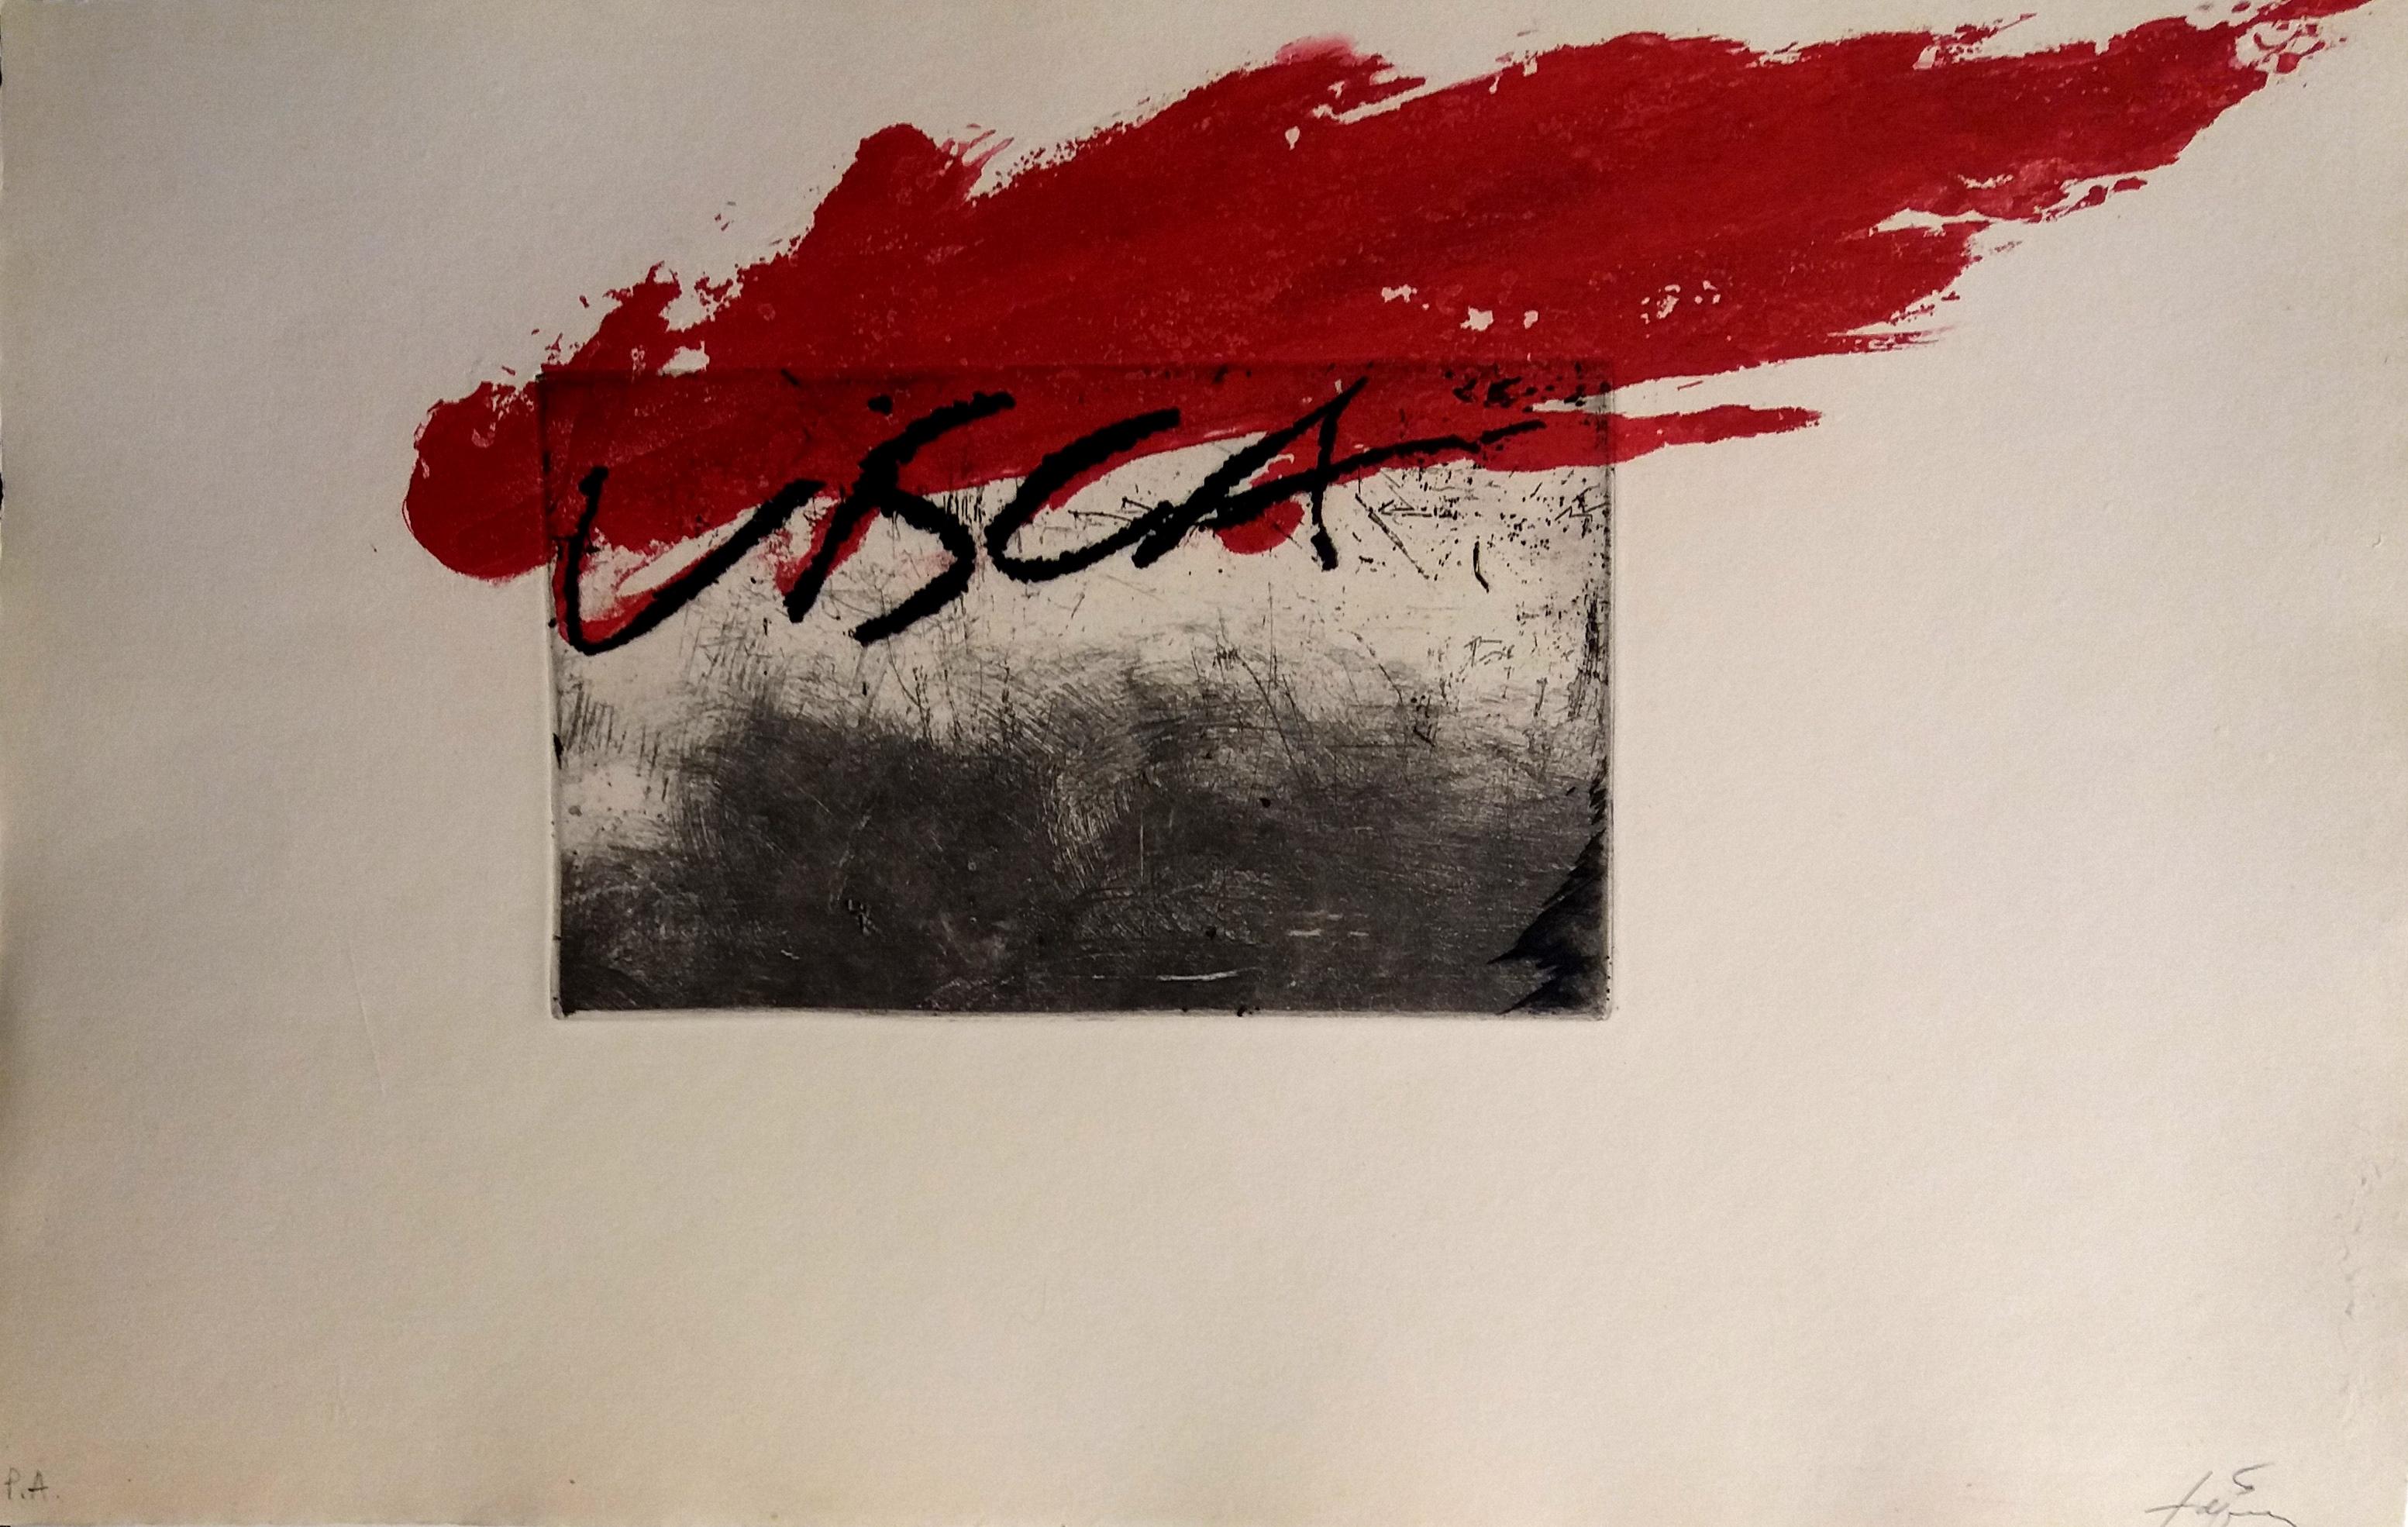 Tapies  Red  Visca original engraving abstract paintiong - Abstract Print by Antoni Tàpies